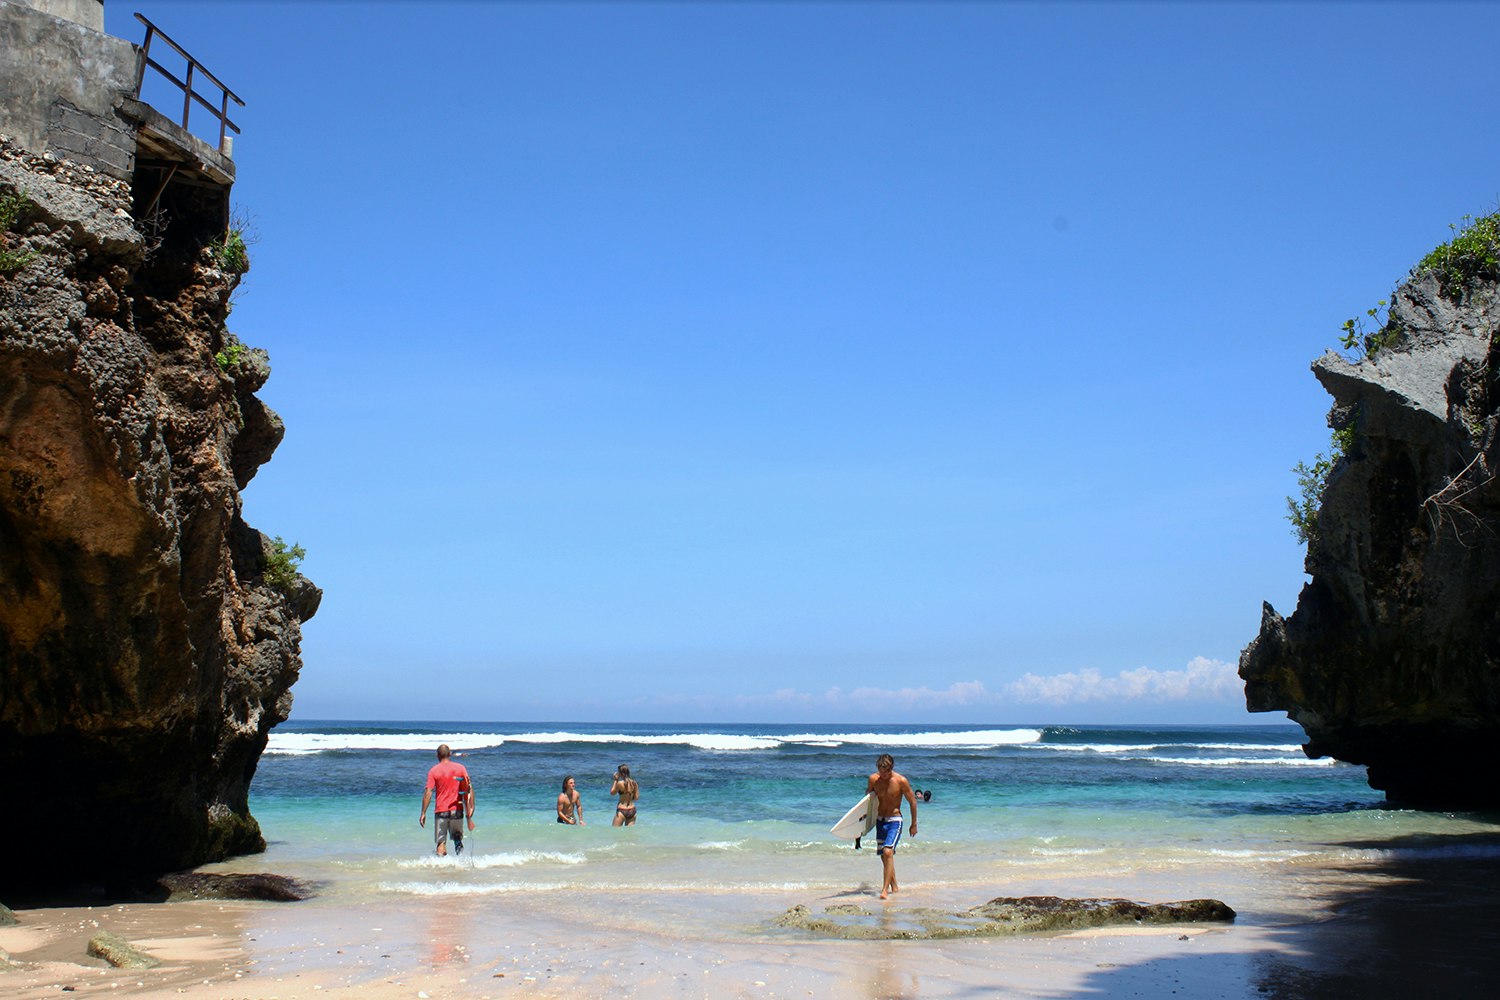 Blue sky and crashing surf during low tide at Uluwatu. Image by Samantha Chalker / Lonely Planet